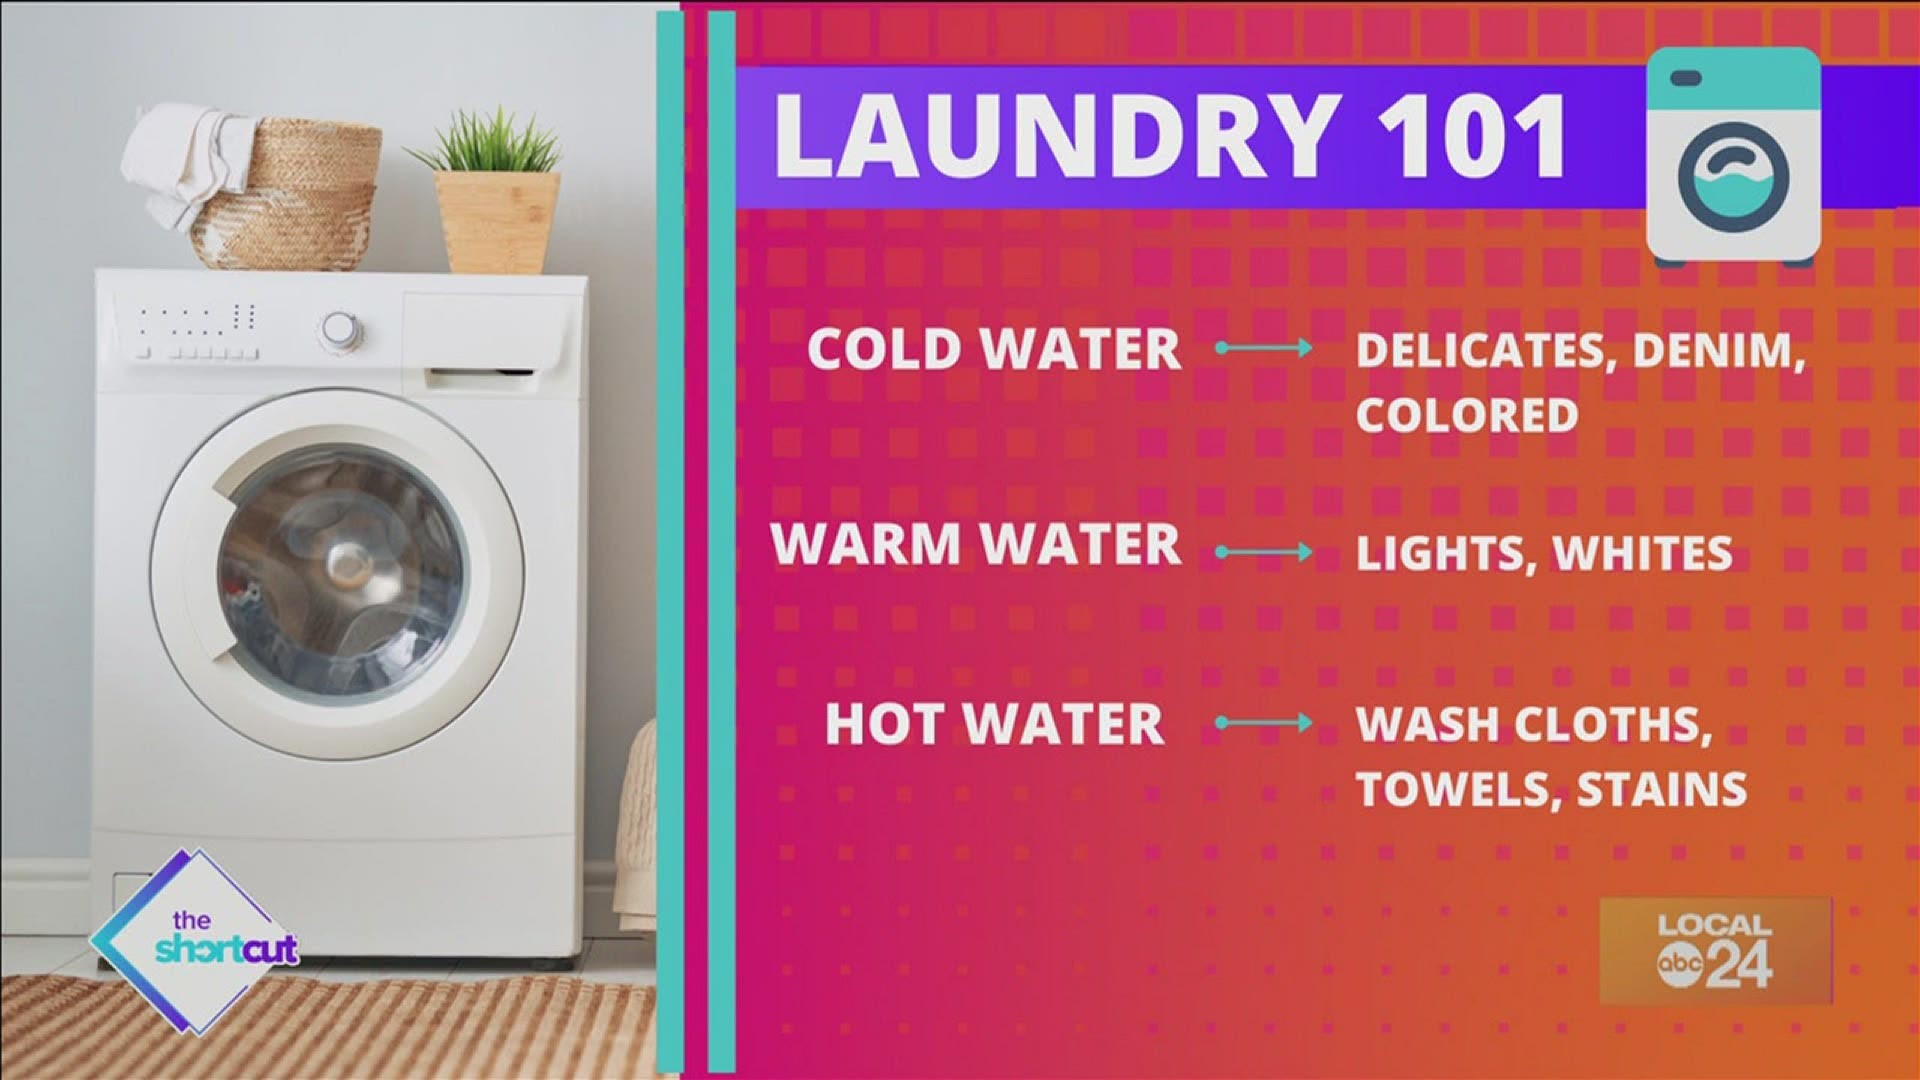 Did you know that you could put your laundry detergent cap into the washing machine no problem? Check out more laundry 101 tips and tricks only on "The Shortcut!"